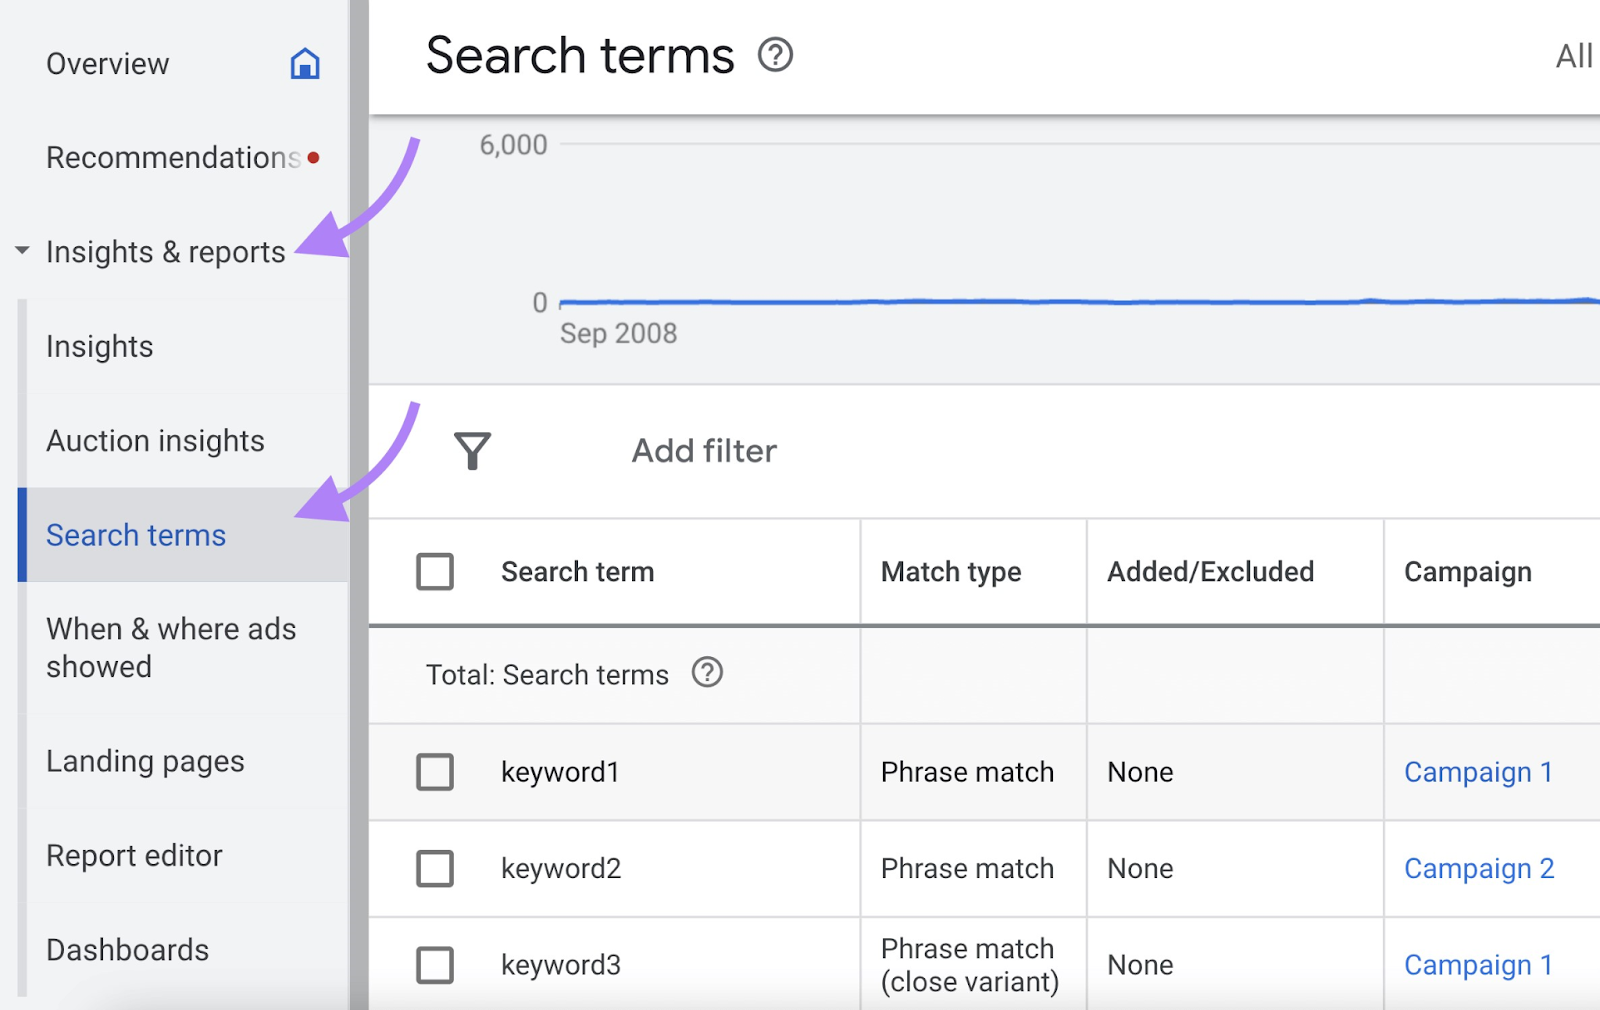 navigating to “Search terms” section